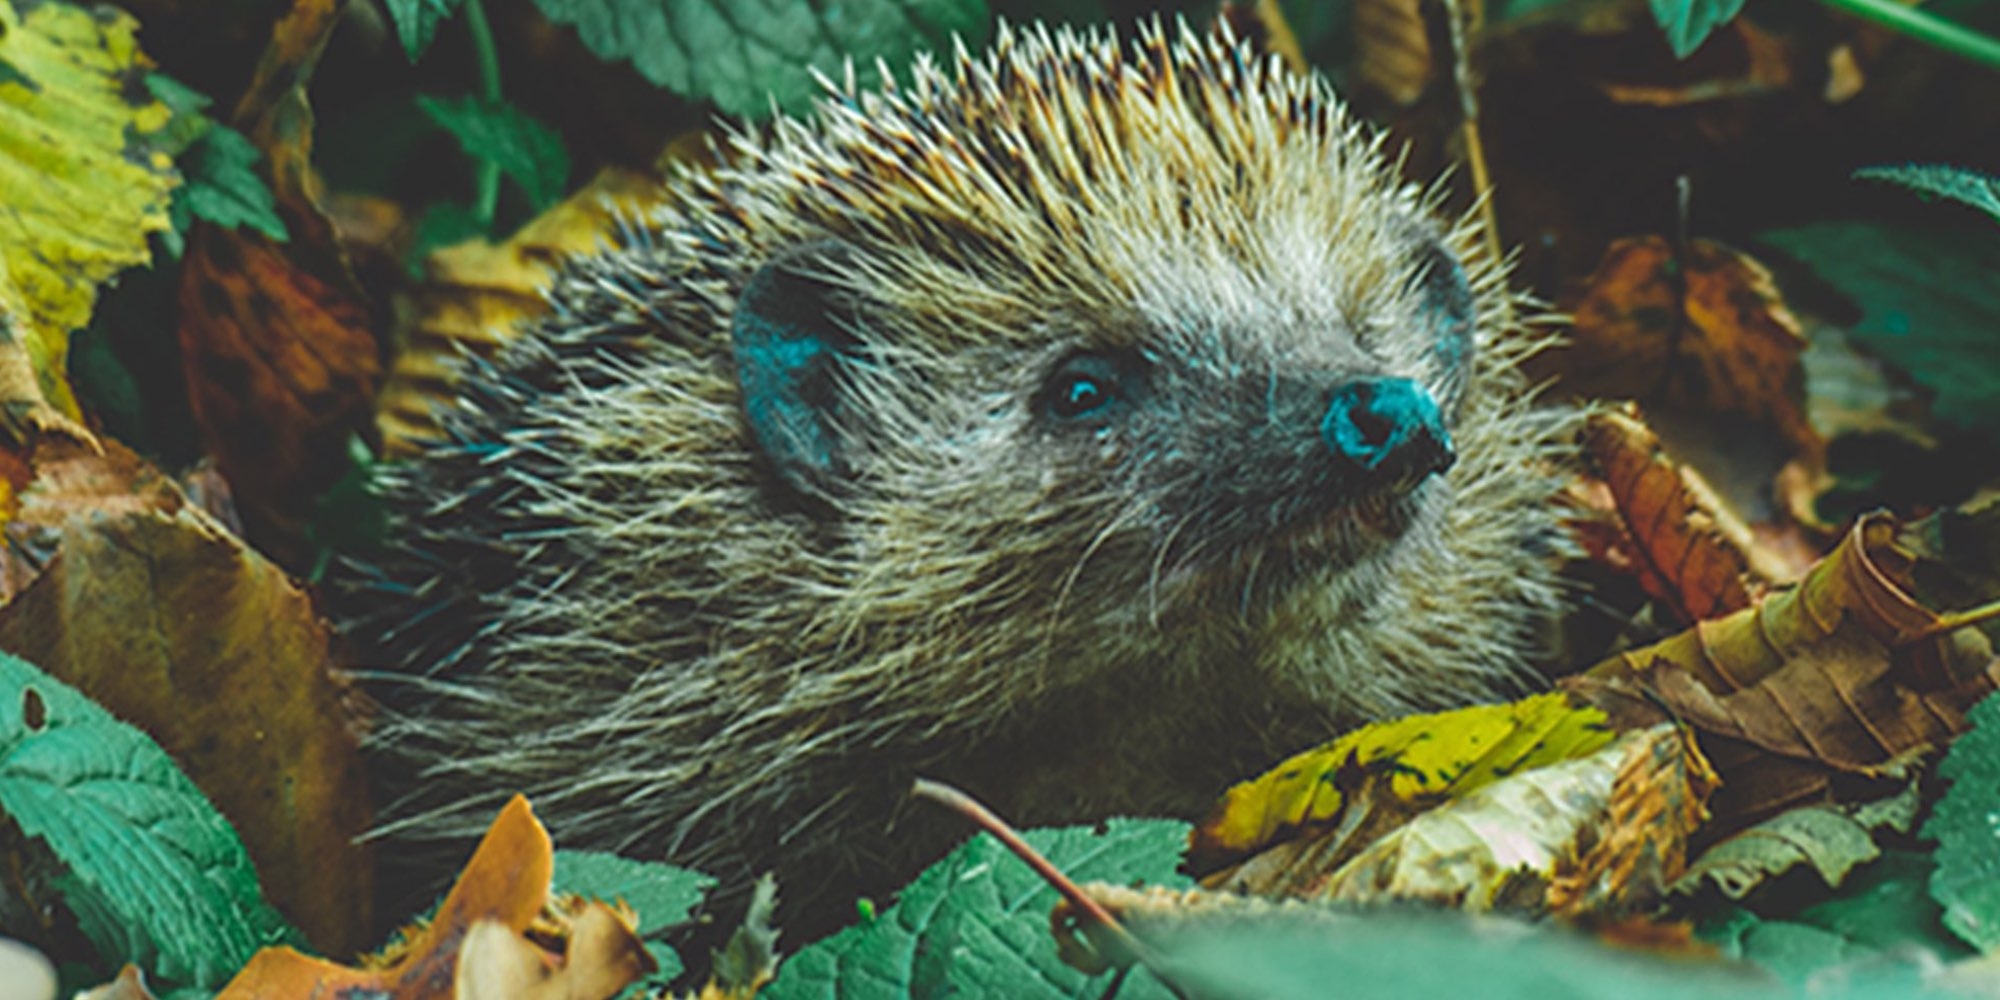 Did you know that hedgehog numbers in the UK have declined by 50% since 2000 and there are now estimated to be fewer than 1 million left?